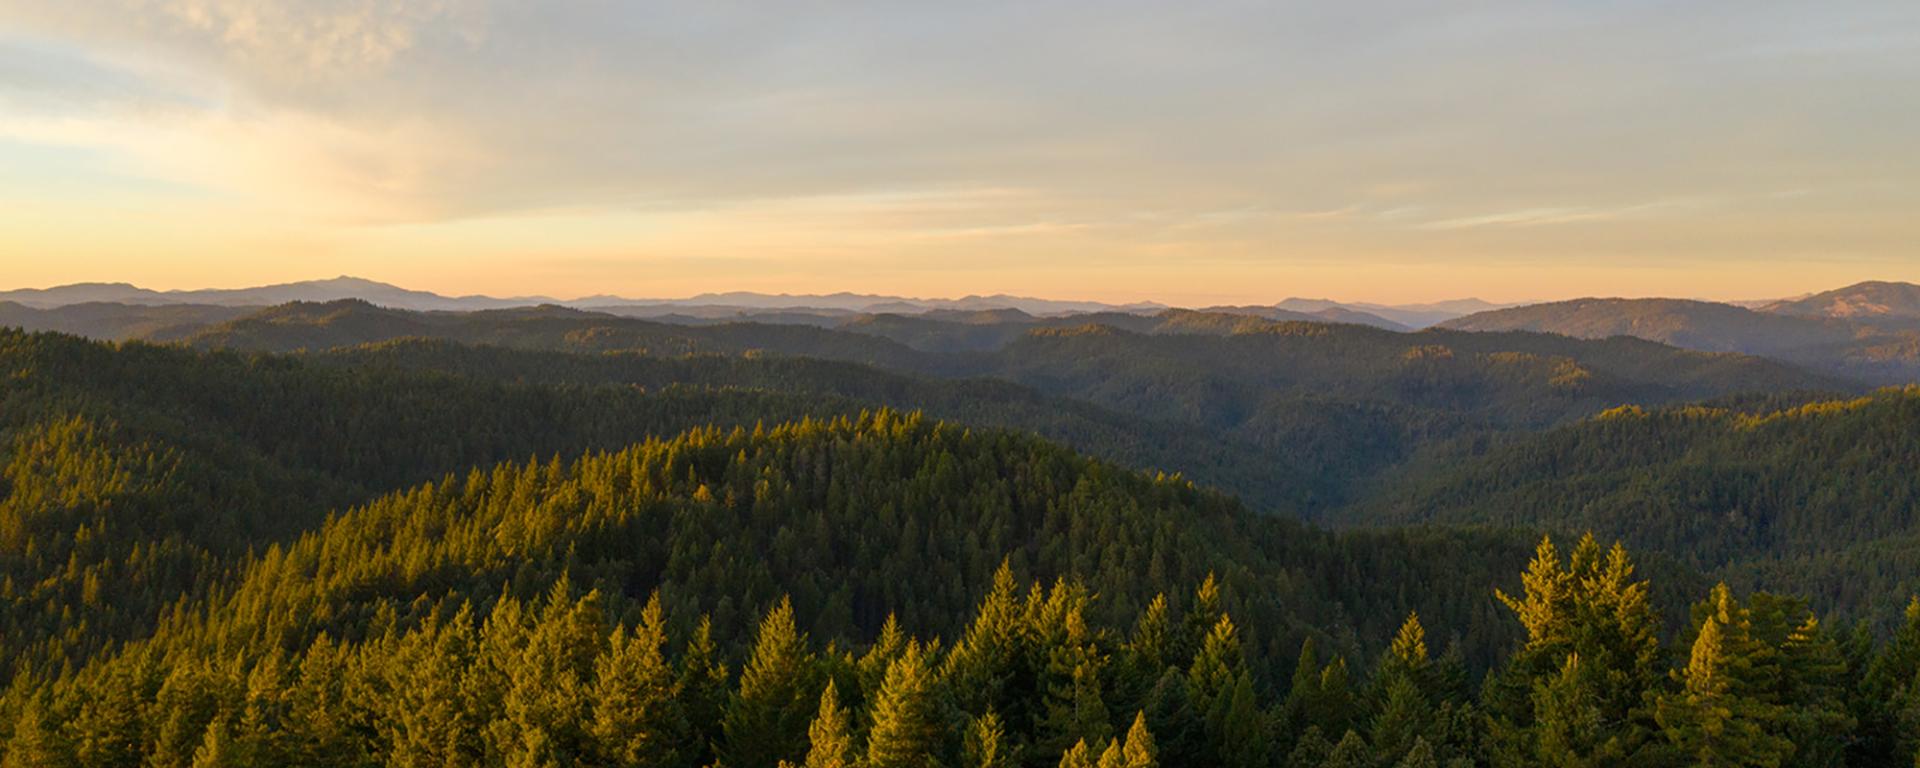 Golden hour light illuminating an expansive landscape of tree-covered mountains.